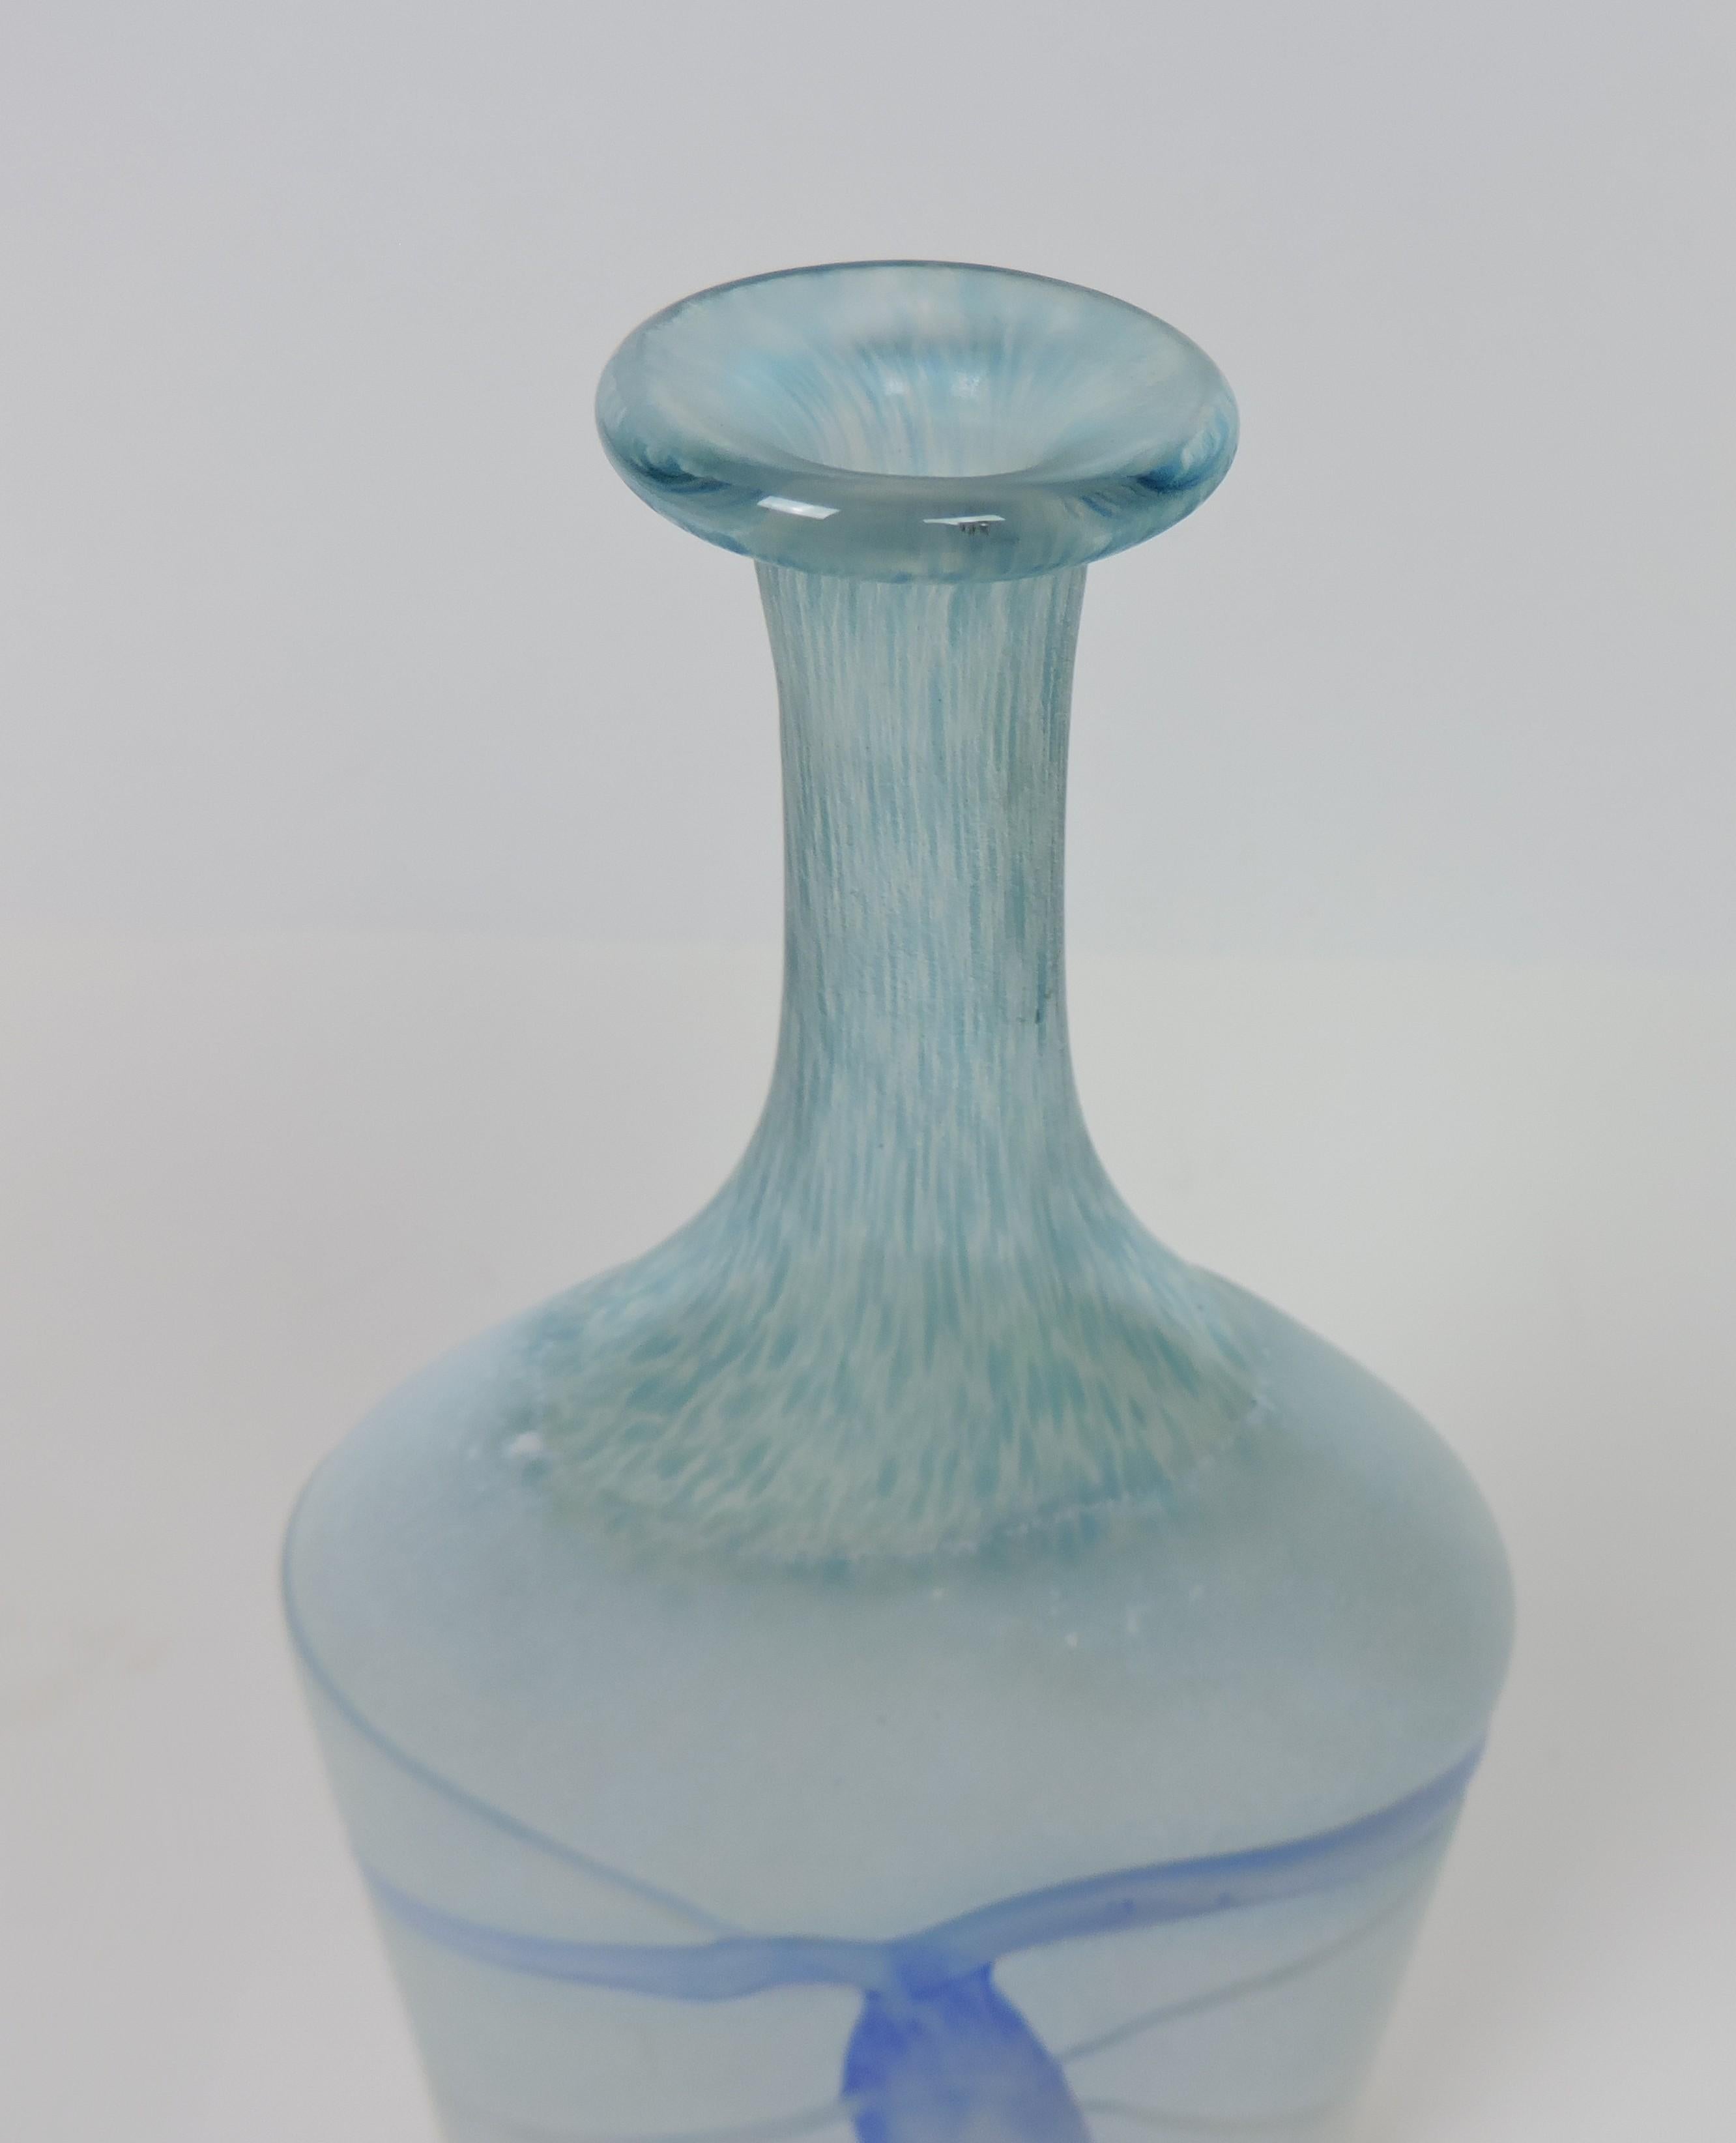 Hand-Crafted Bertil Vallien Kosta Boda Glass Vase Galaxy Blue Series 1980s Artists Collection For Sale